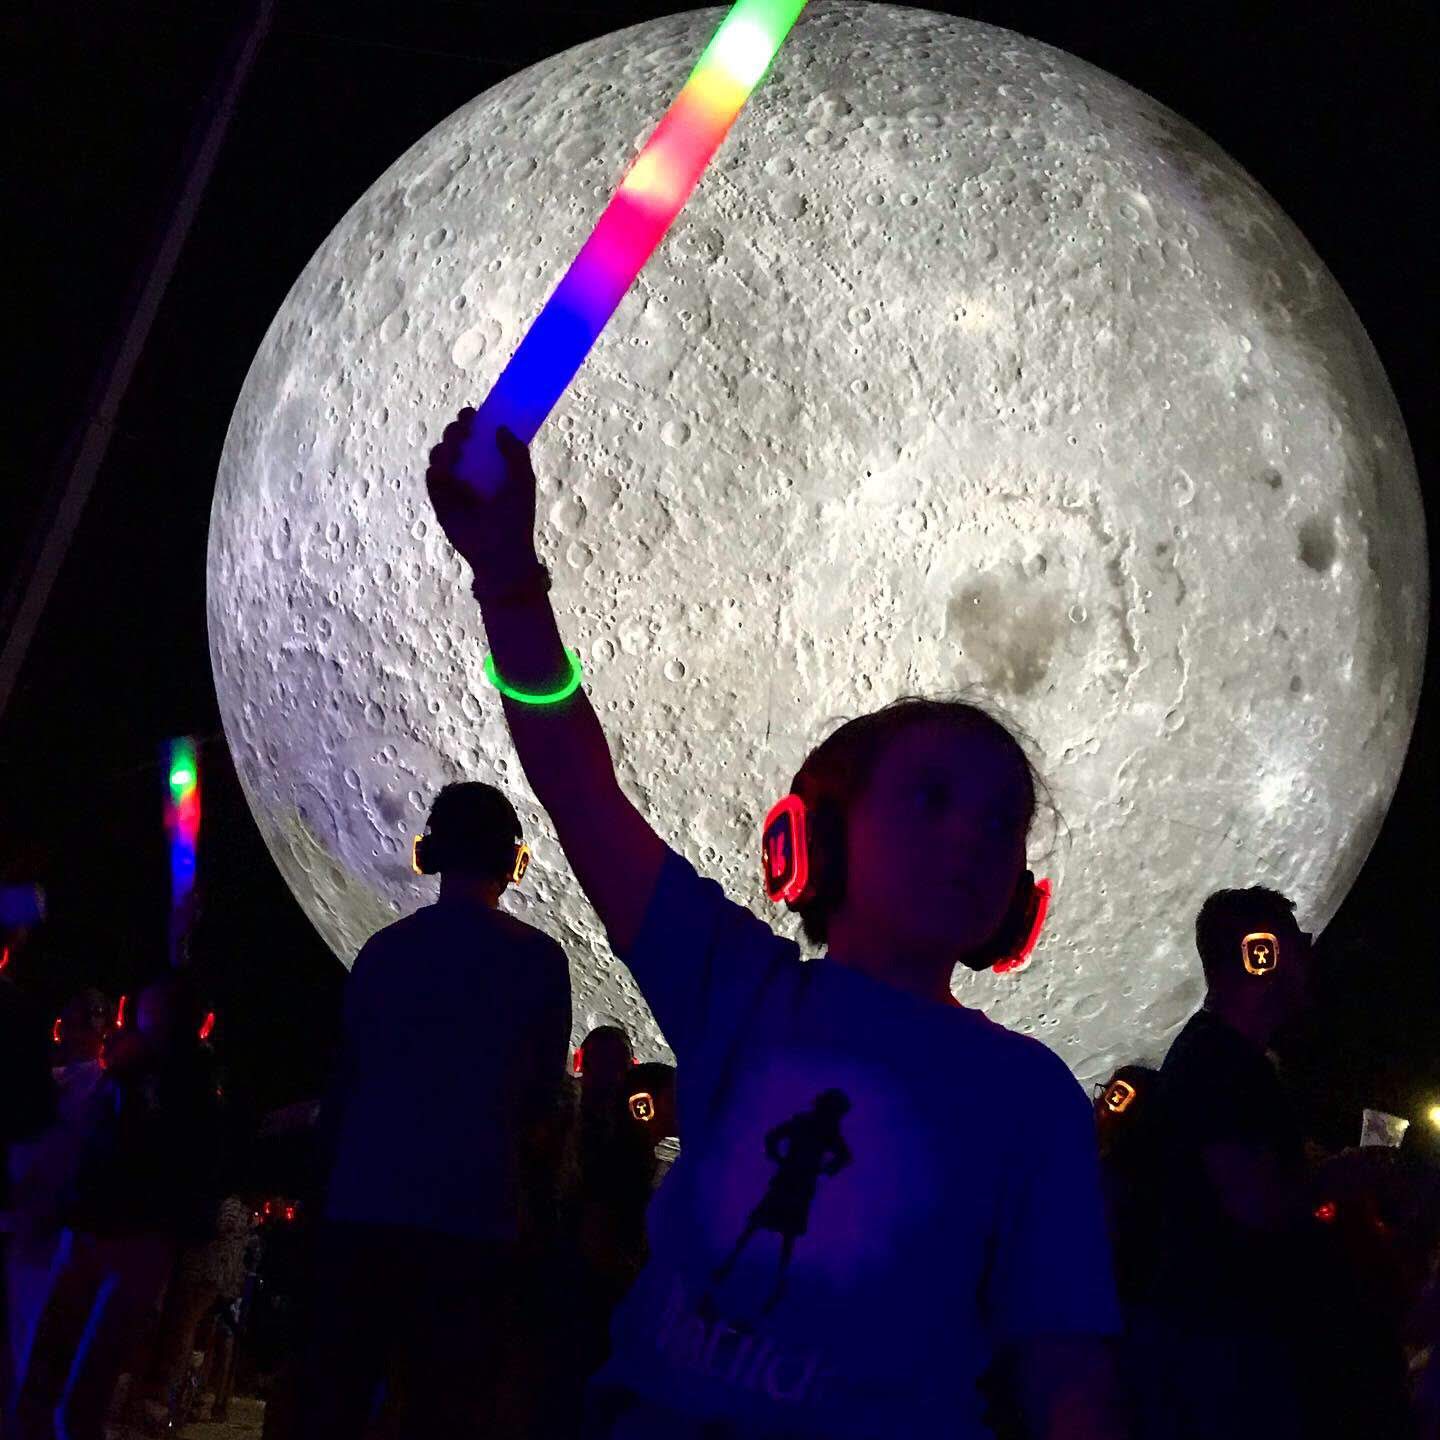 A boy waves a light wand in front of an illuminated moon